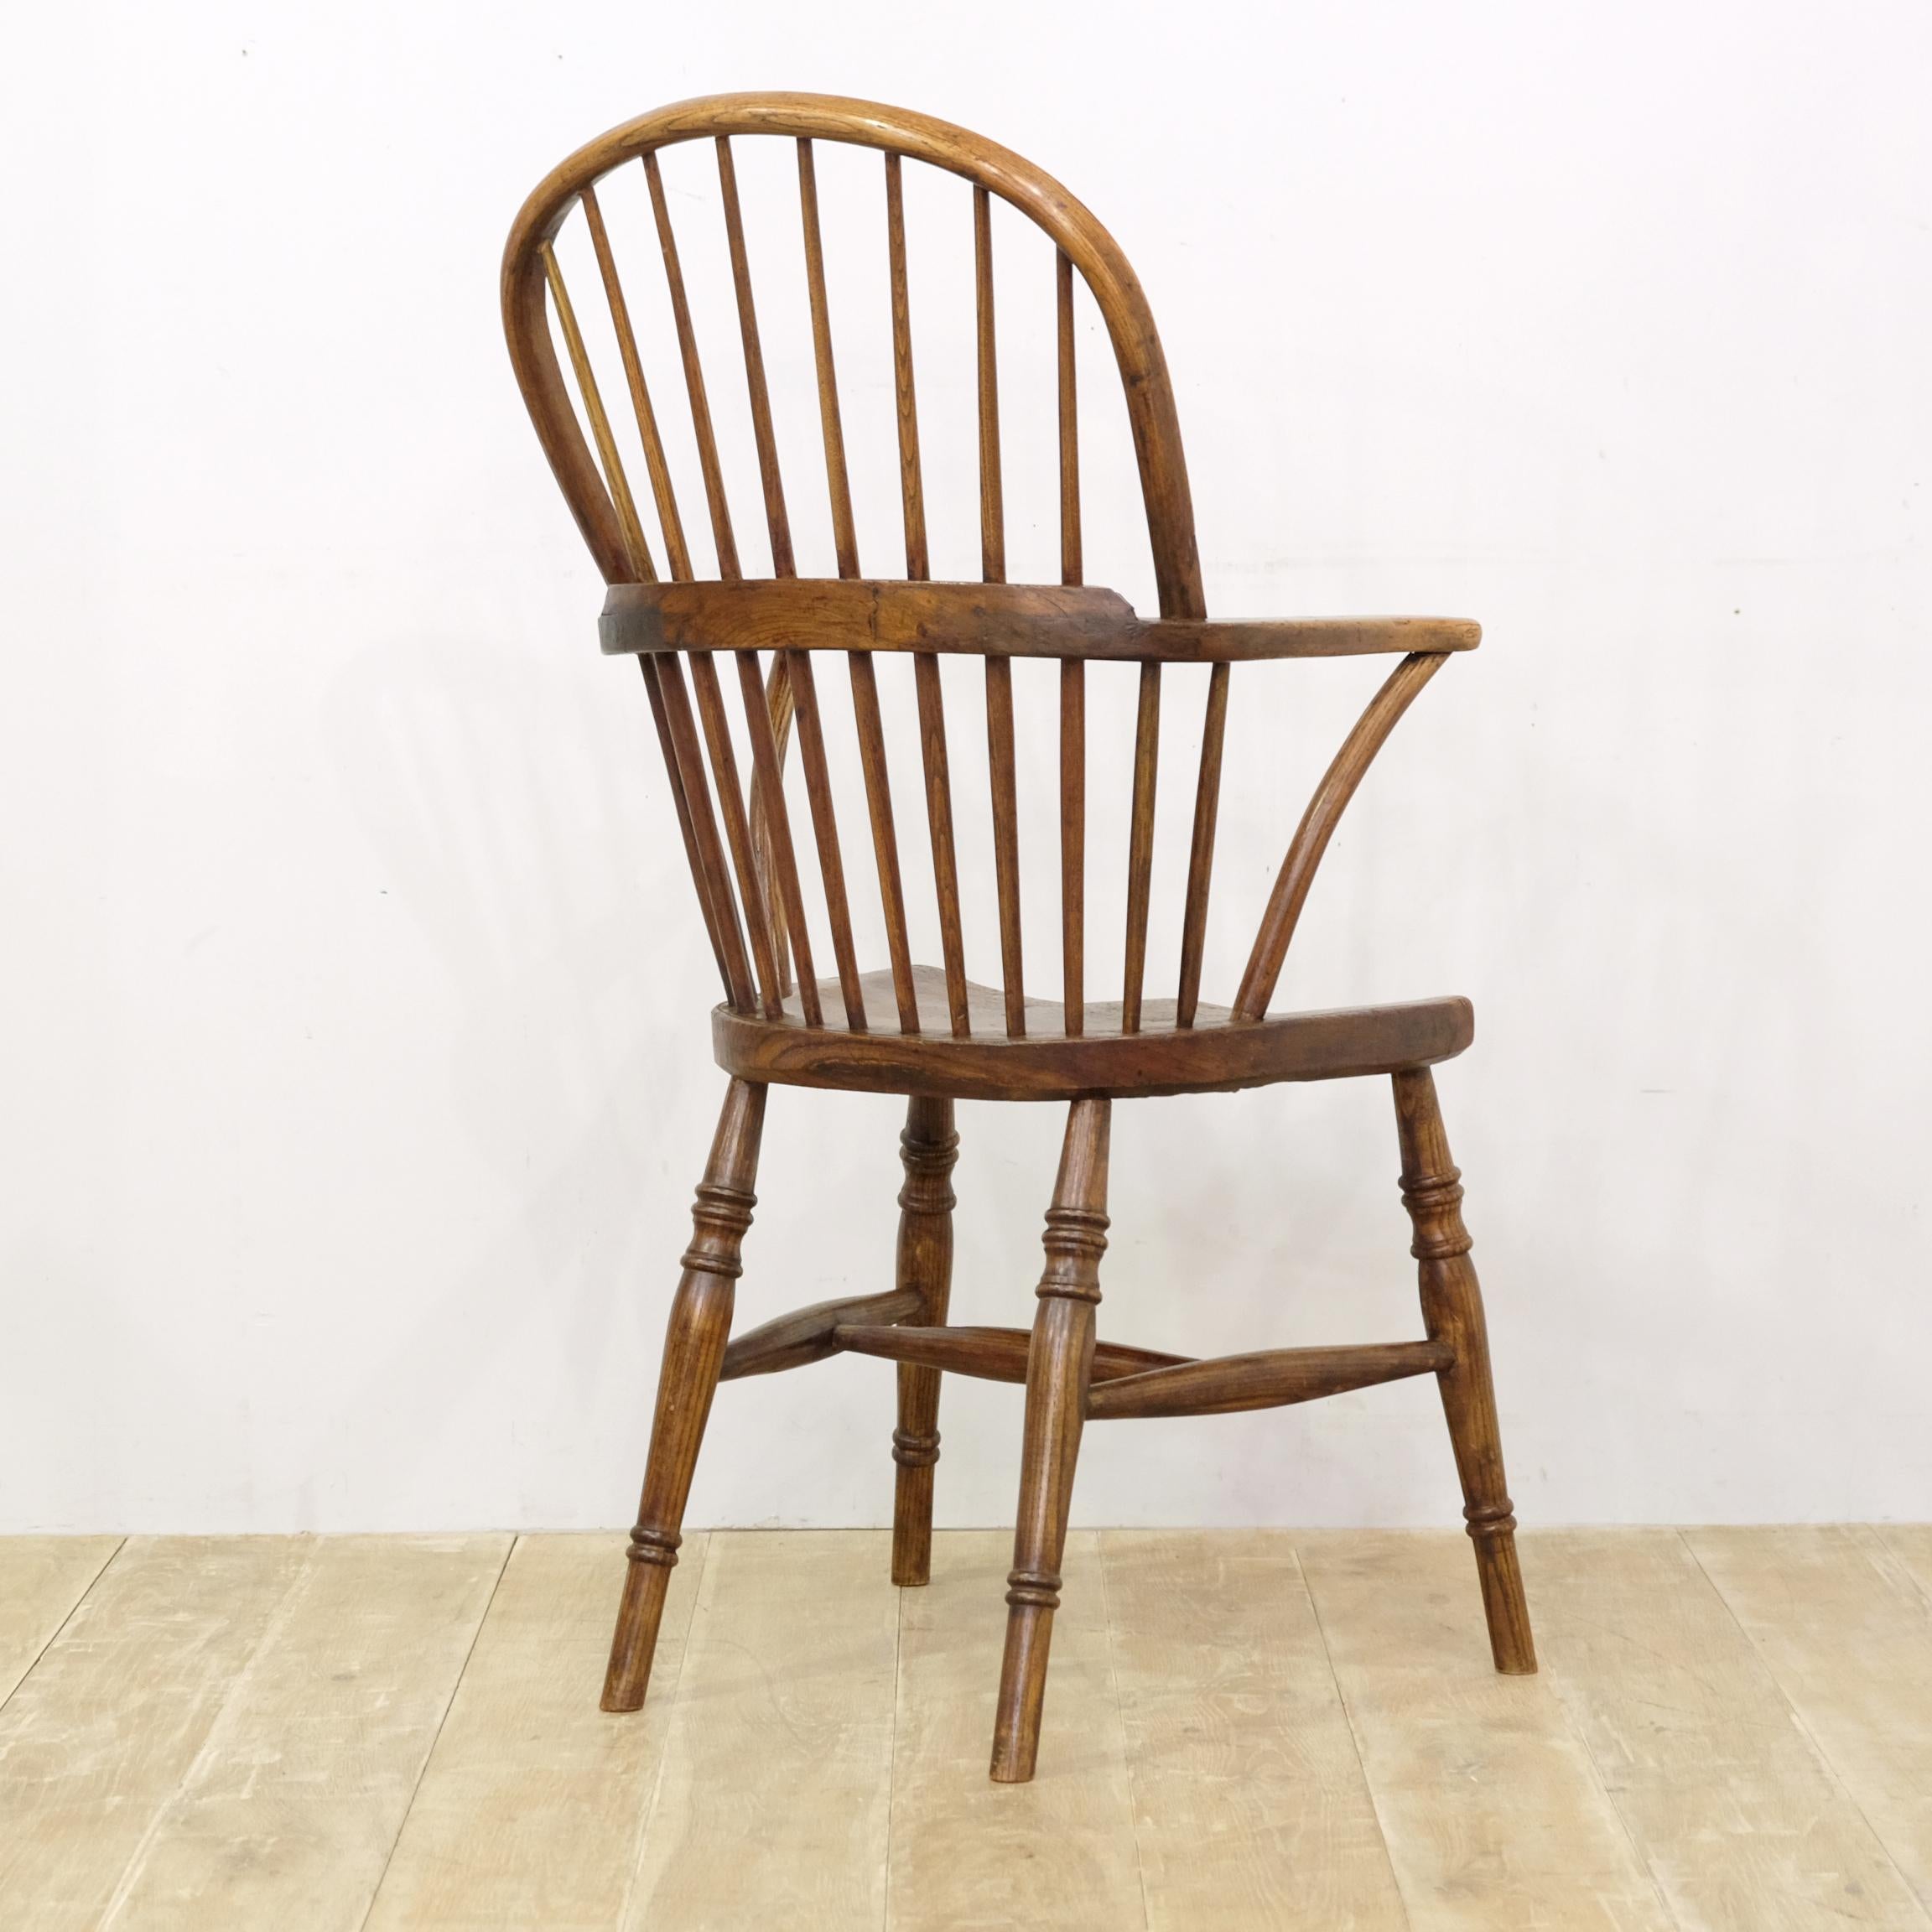 Early 19th Century English West Country Windsor Chair, Simple Stick Back, Elm and Ash, Georgian